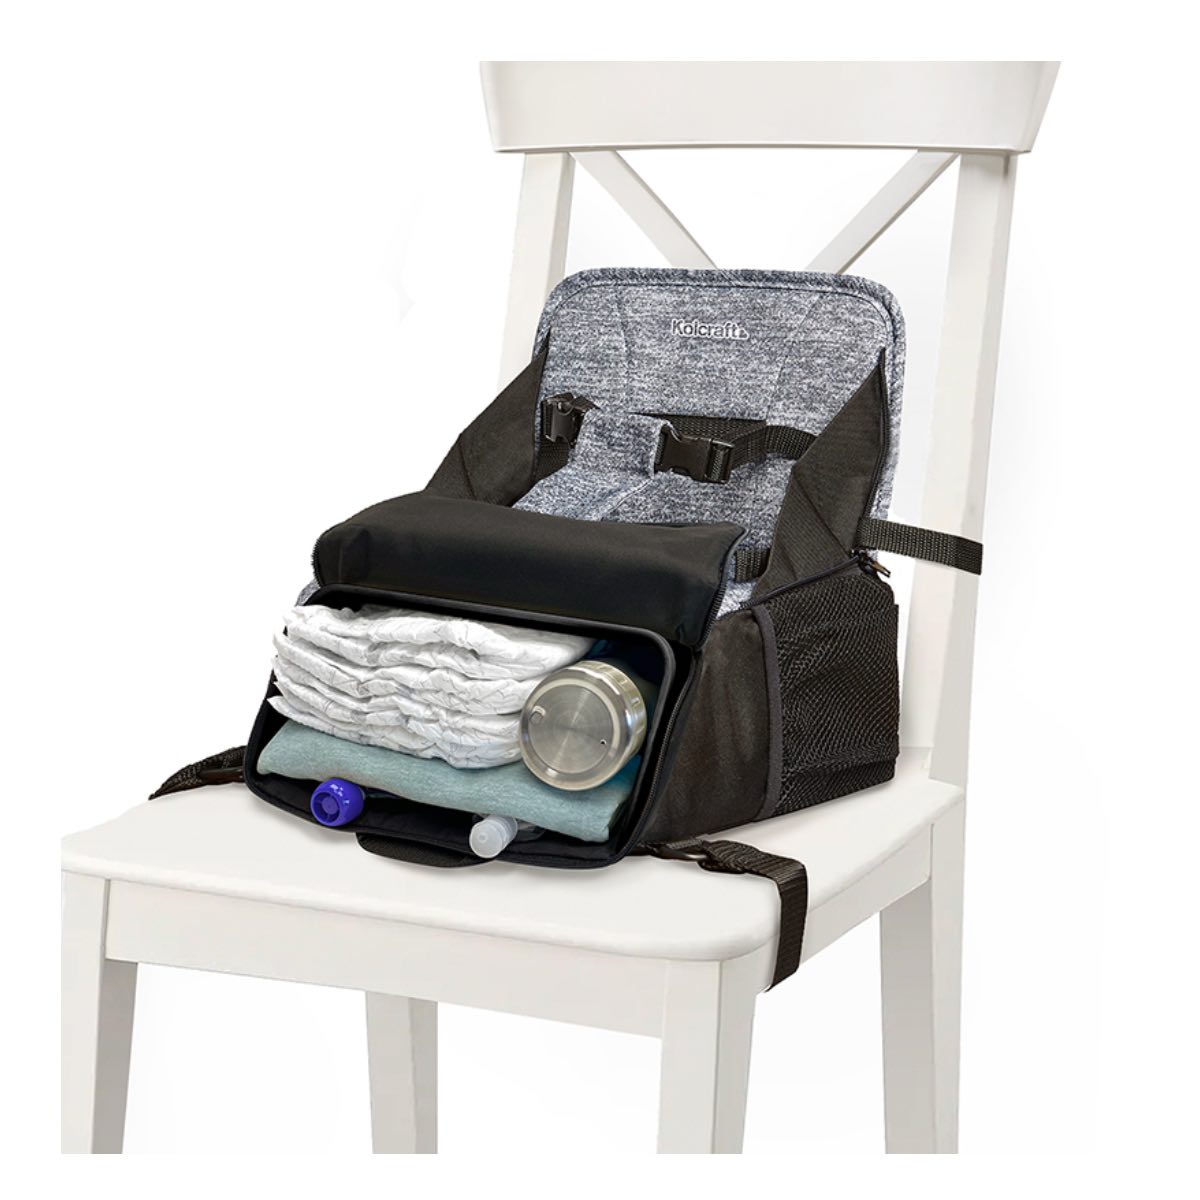 Kolcraft Travel Duo 2 in 1 Portable Booster Seat and Diaper Bag